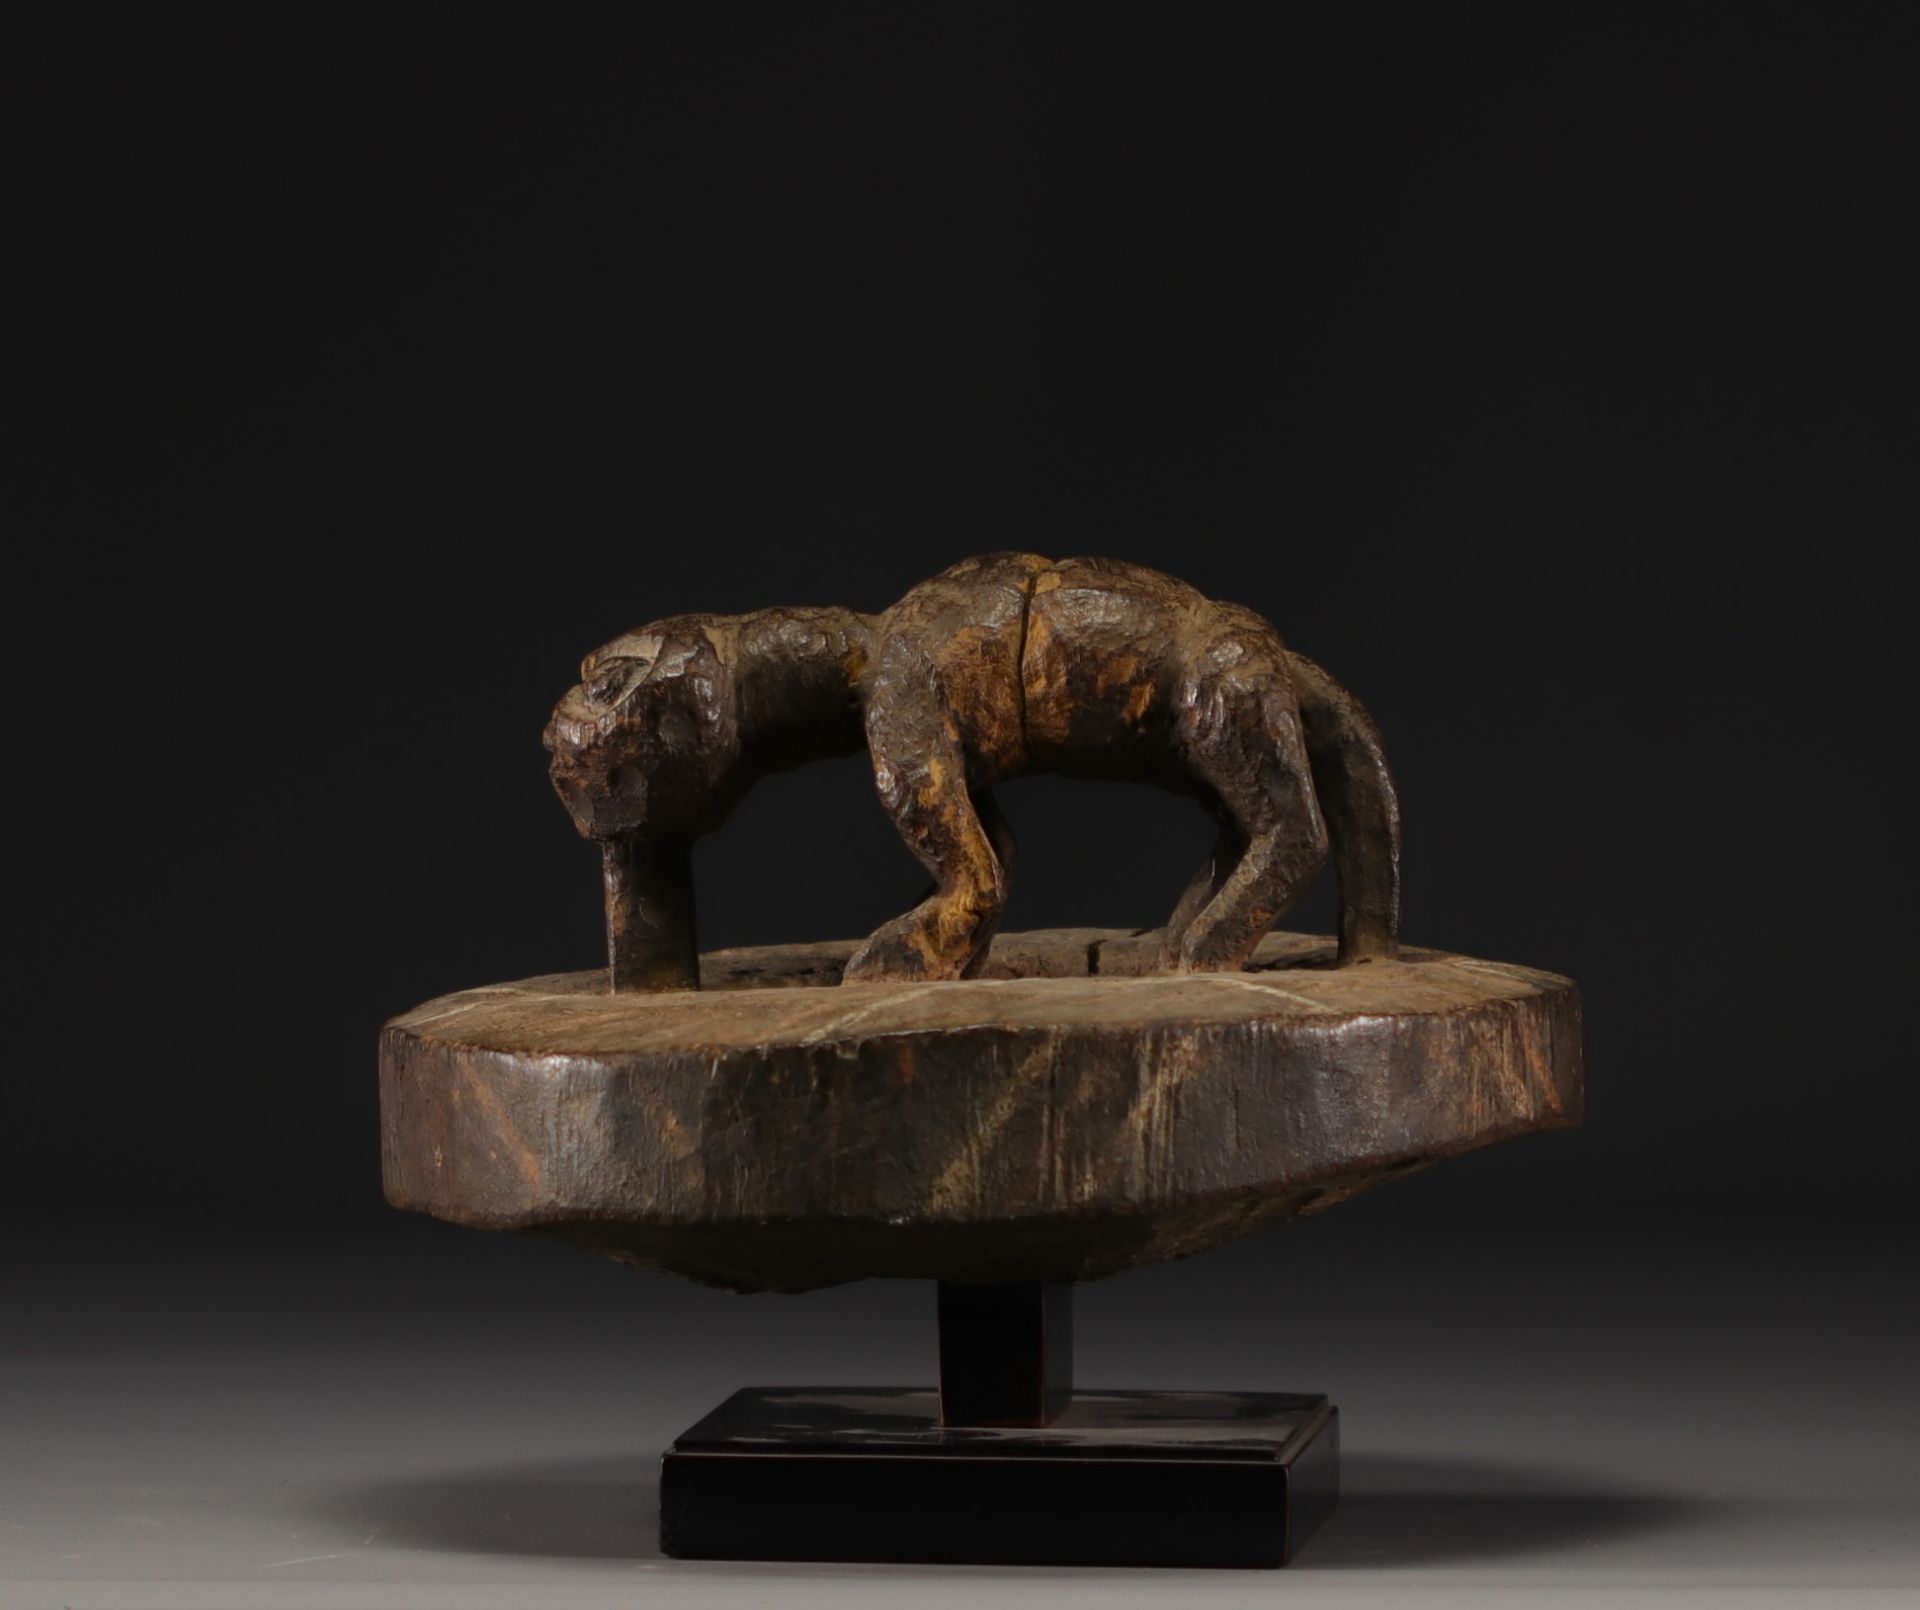 Altar decorated with a stylized animal - Mambila - Cameroon